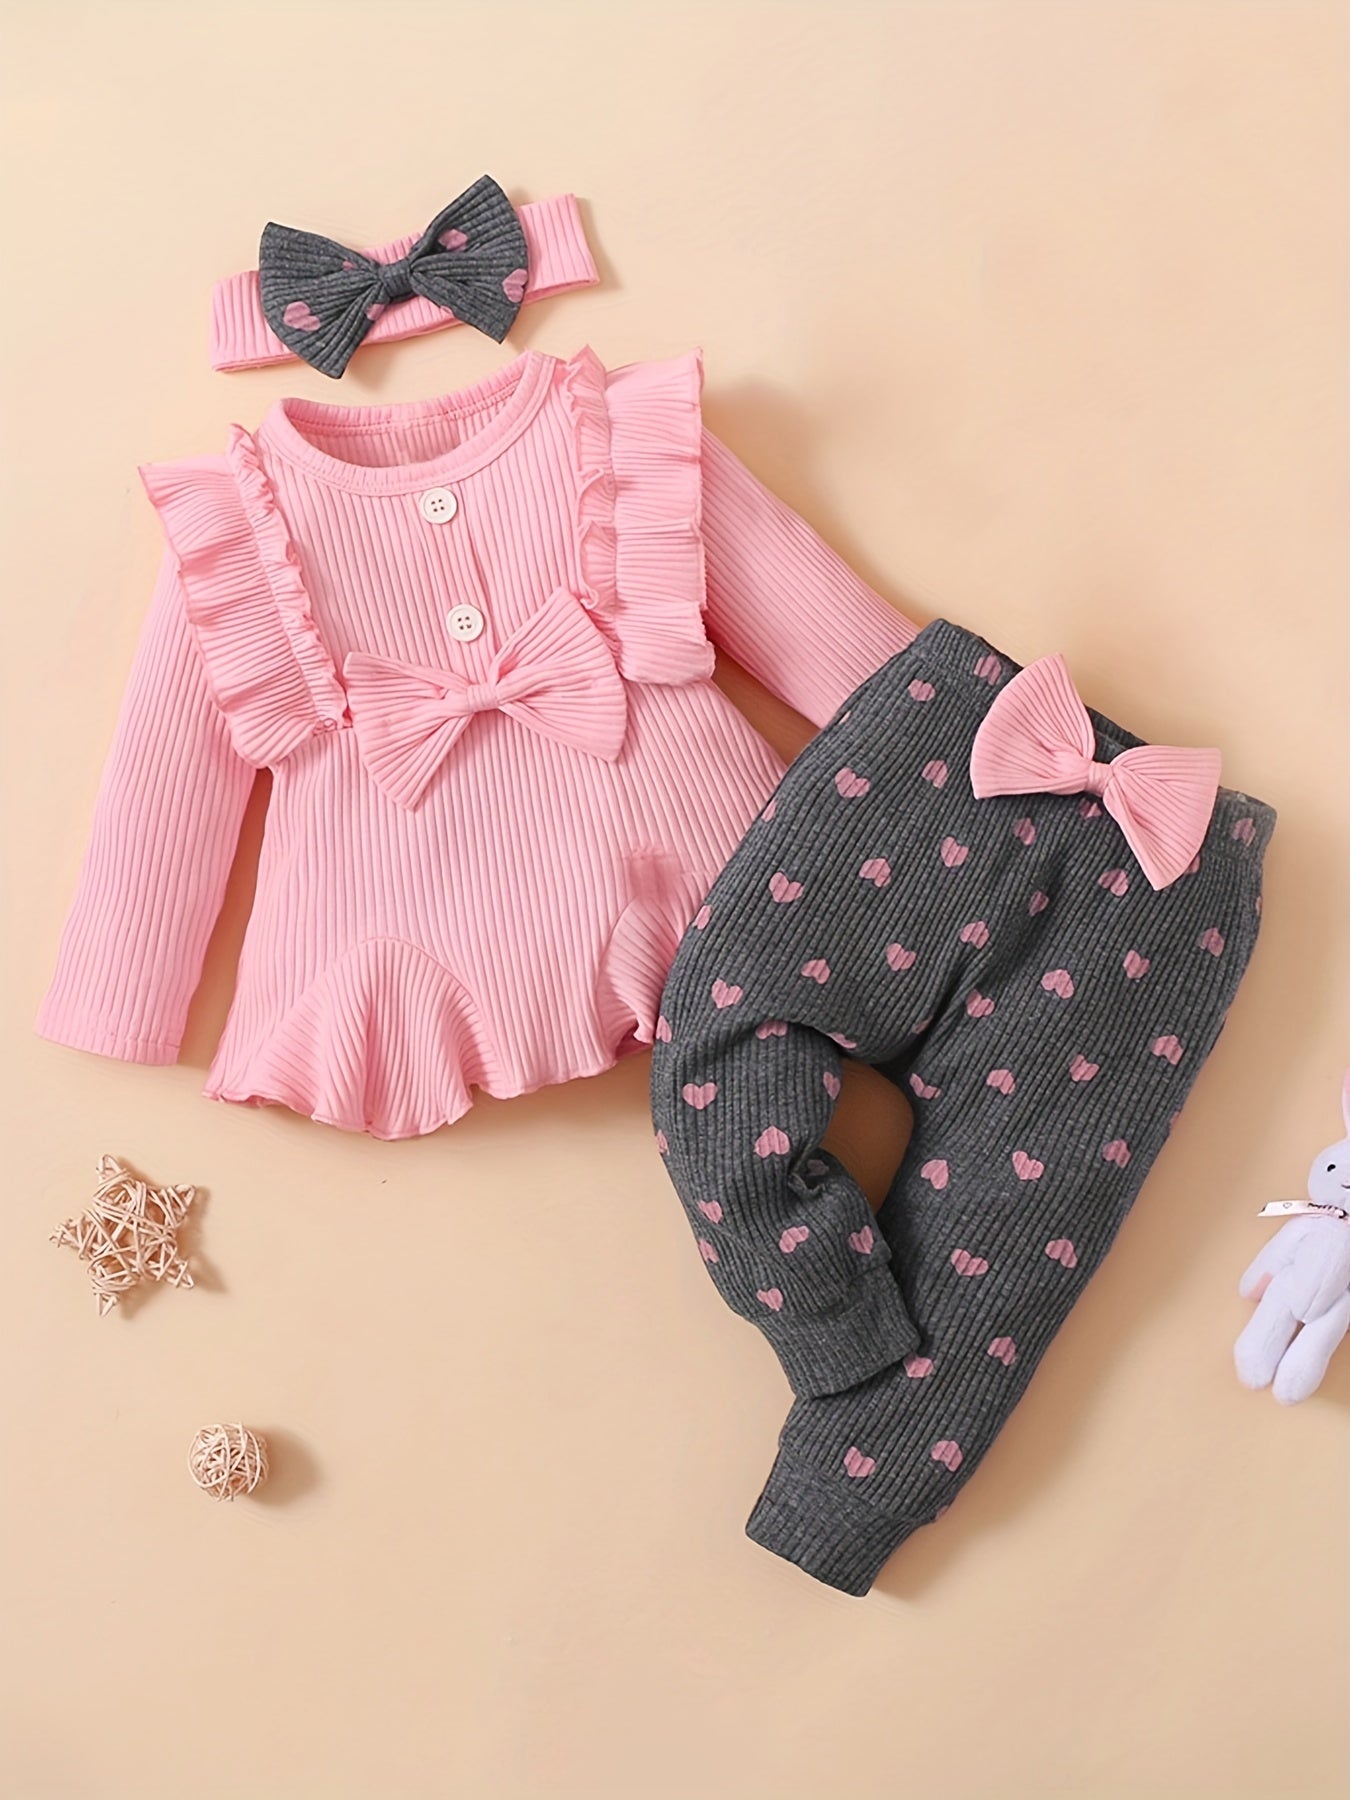 Adorable 3-Piece Outfit for Baby Girls: Ruffle Top, Leggings & Bow Headband!